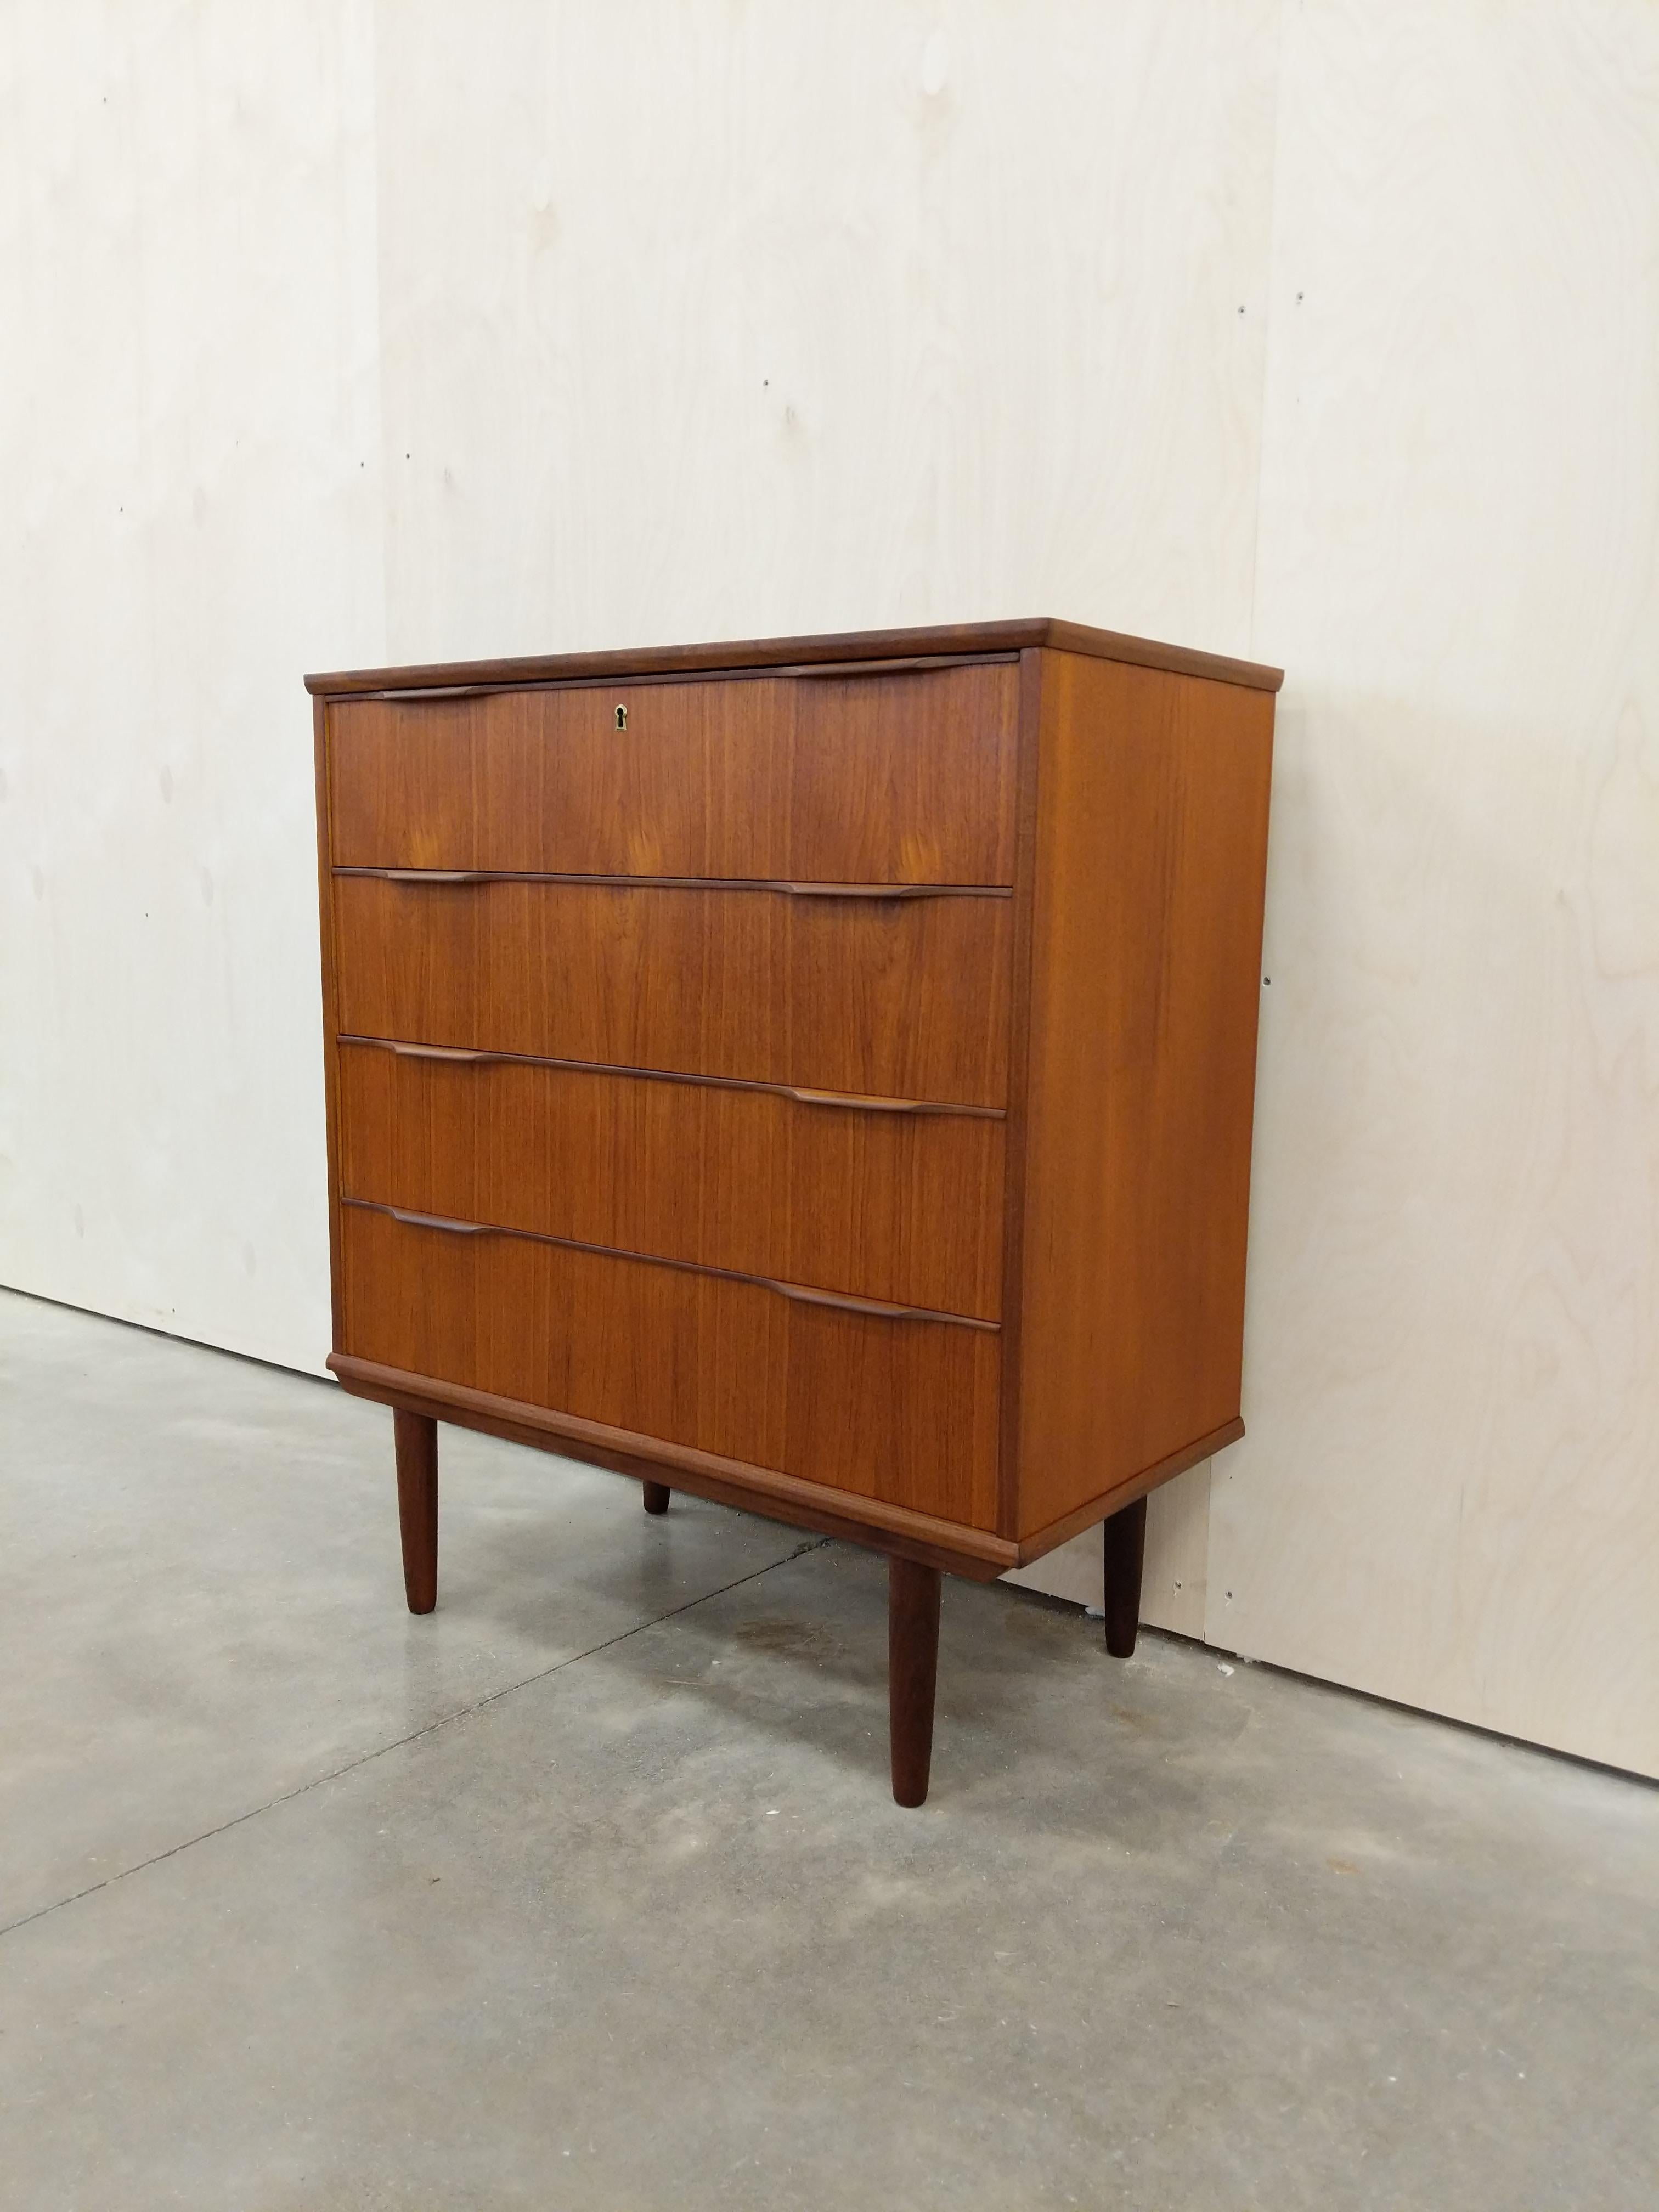 Authentic vintage mid century Danish / Scandinavian Modern teak low dresser / chest of drawers.

By Ejsing Møbelfabrik.

This piece is in excellent refinished condition with very few signs of age-related wear (see photos).

If you would like any